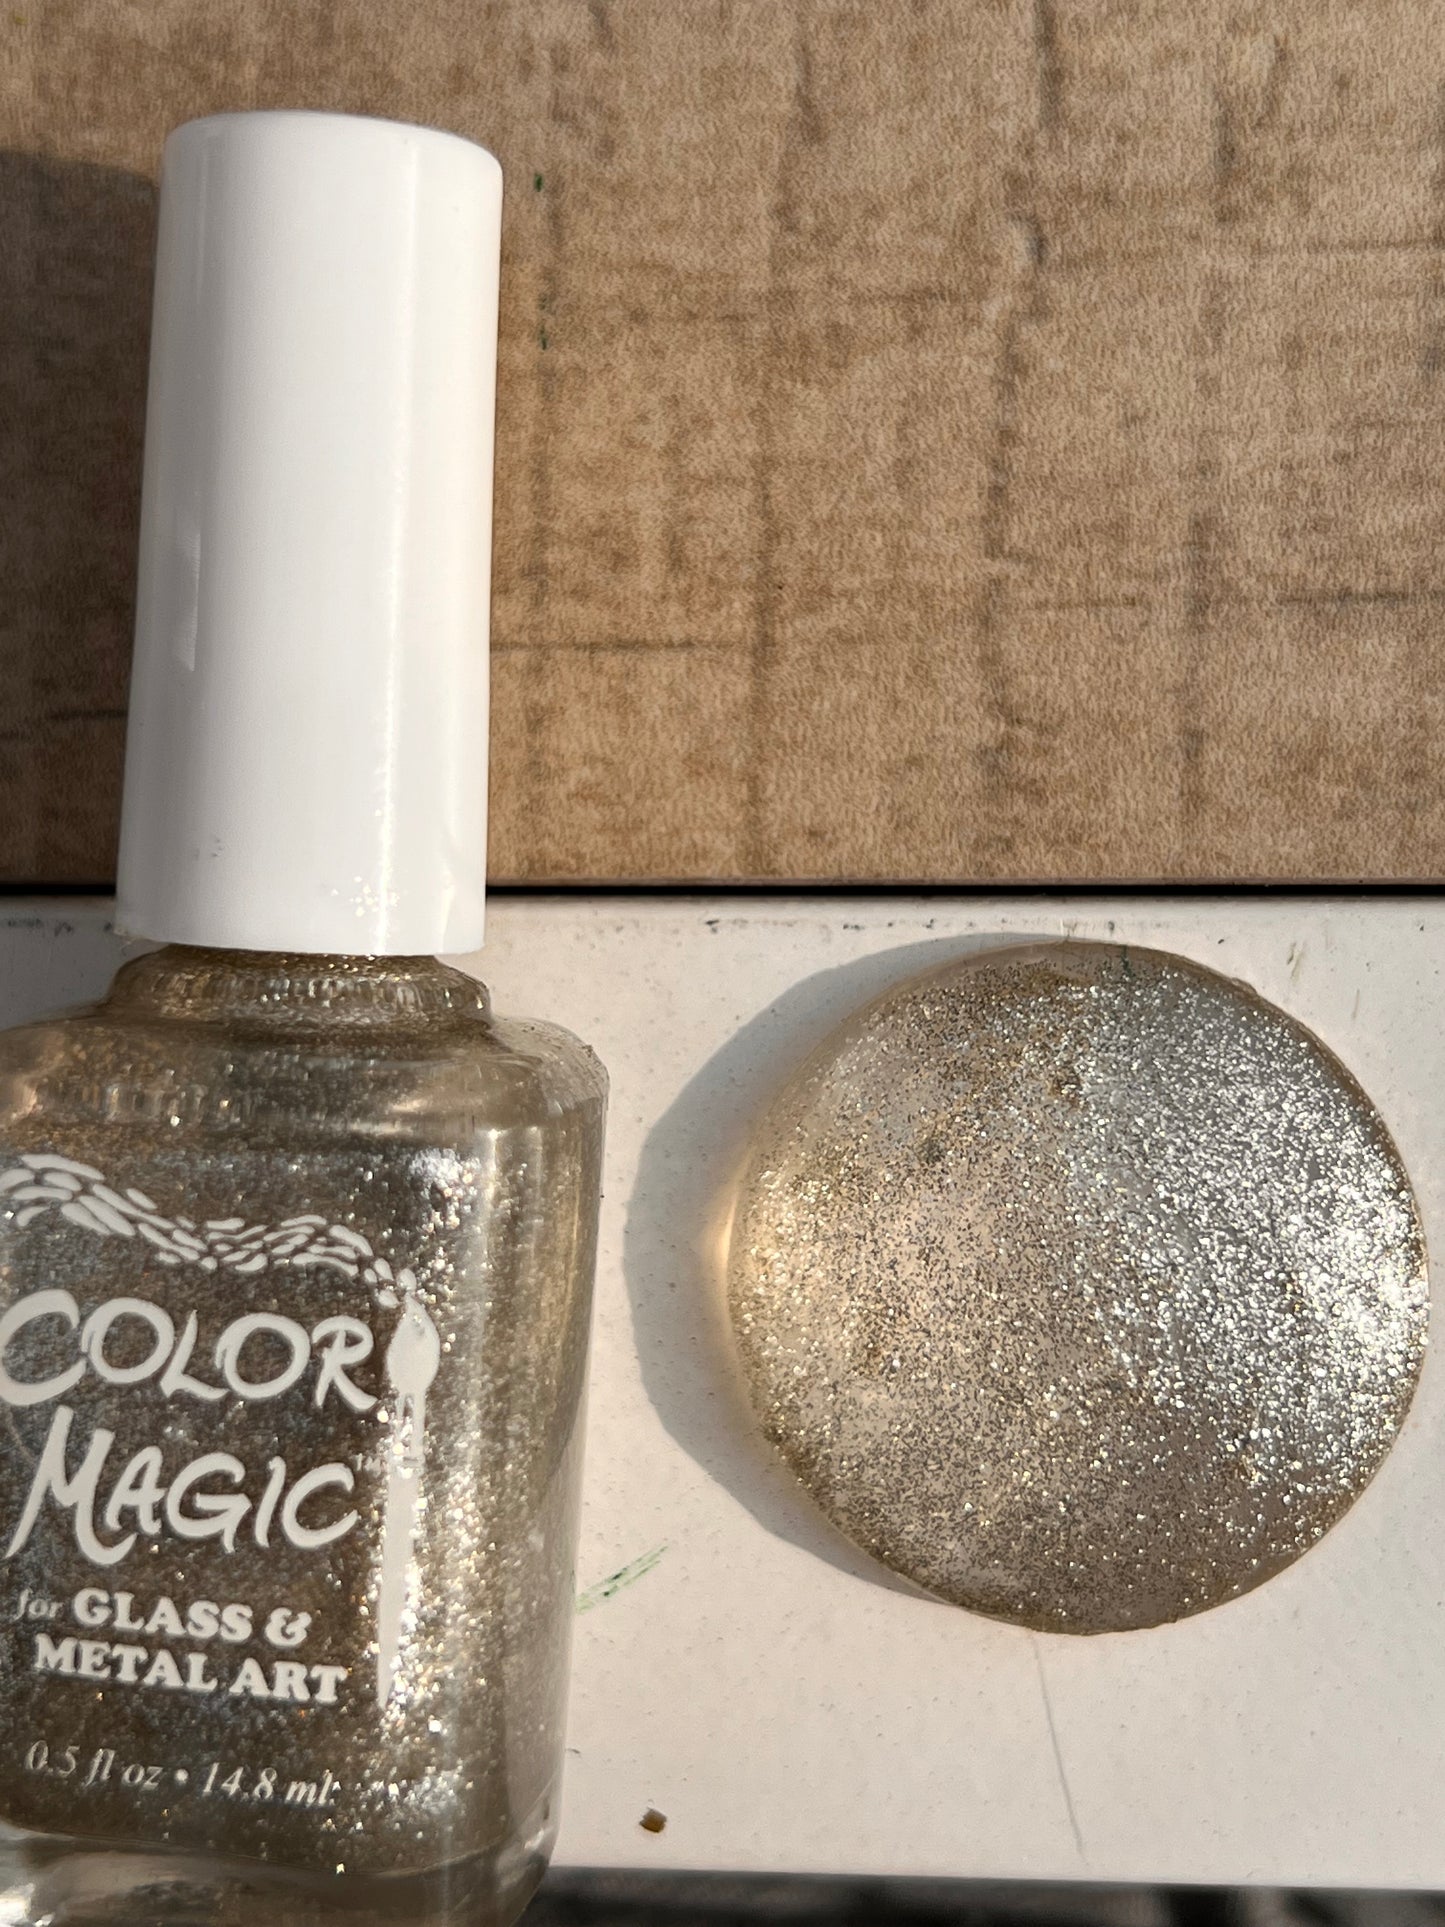 RESTOCKED & NEW Color Magic Glass & Metal Paint